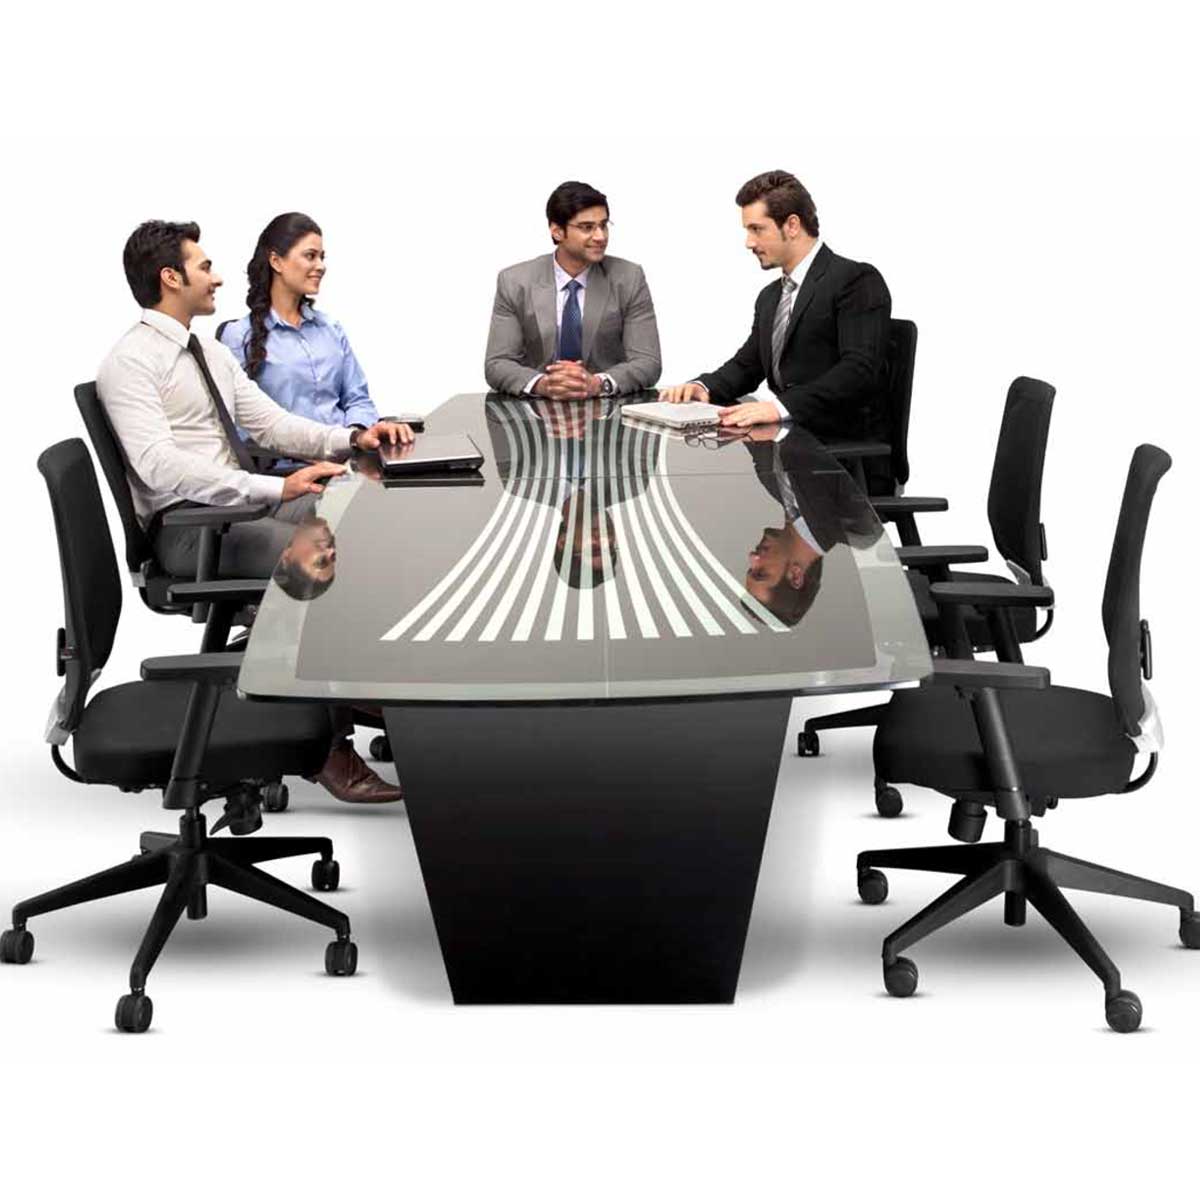 Metal Office Table Manufacturers, Suppliers in South Extension Part 2